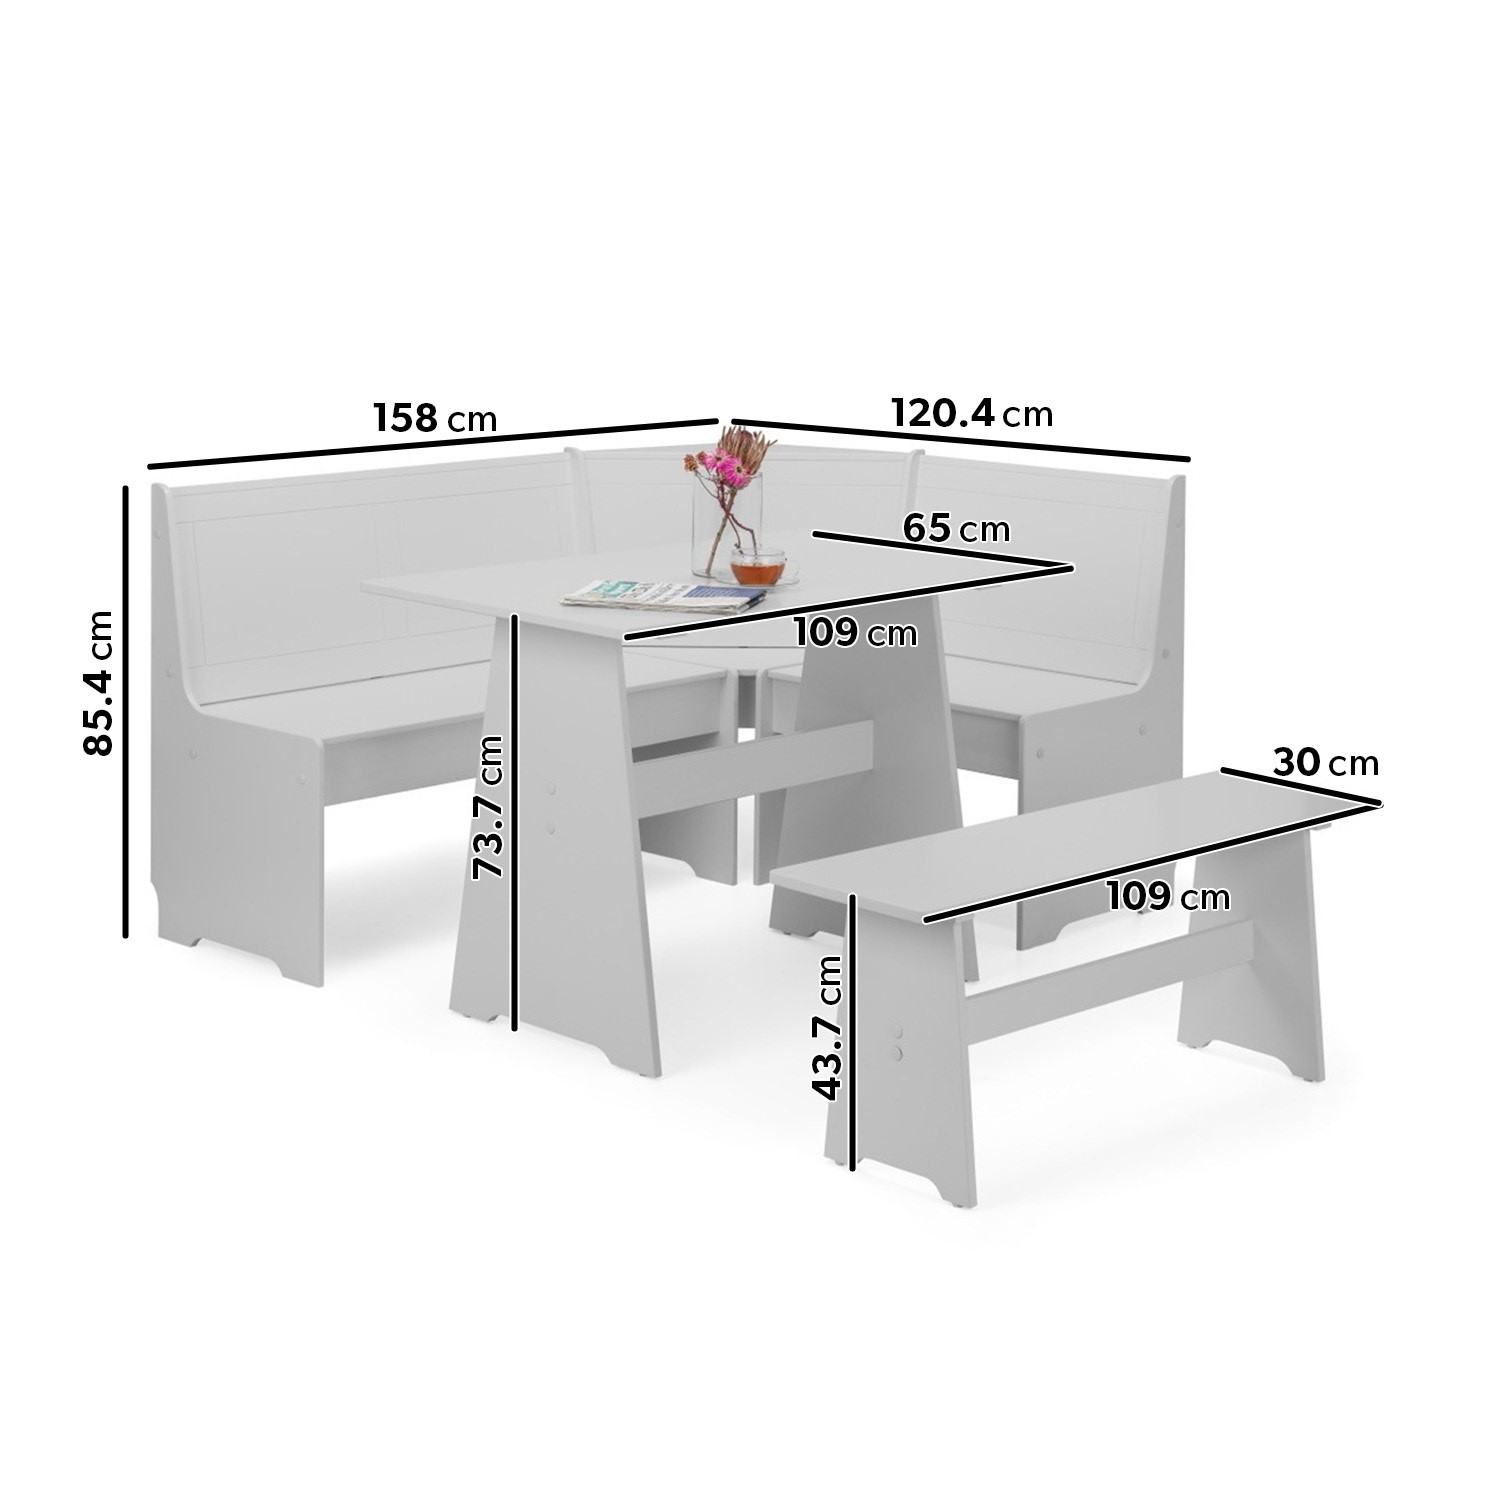 Read more about Light grey wooden corner dining set with a bench seats 5 newport